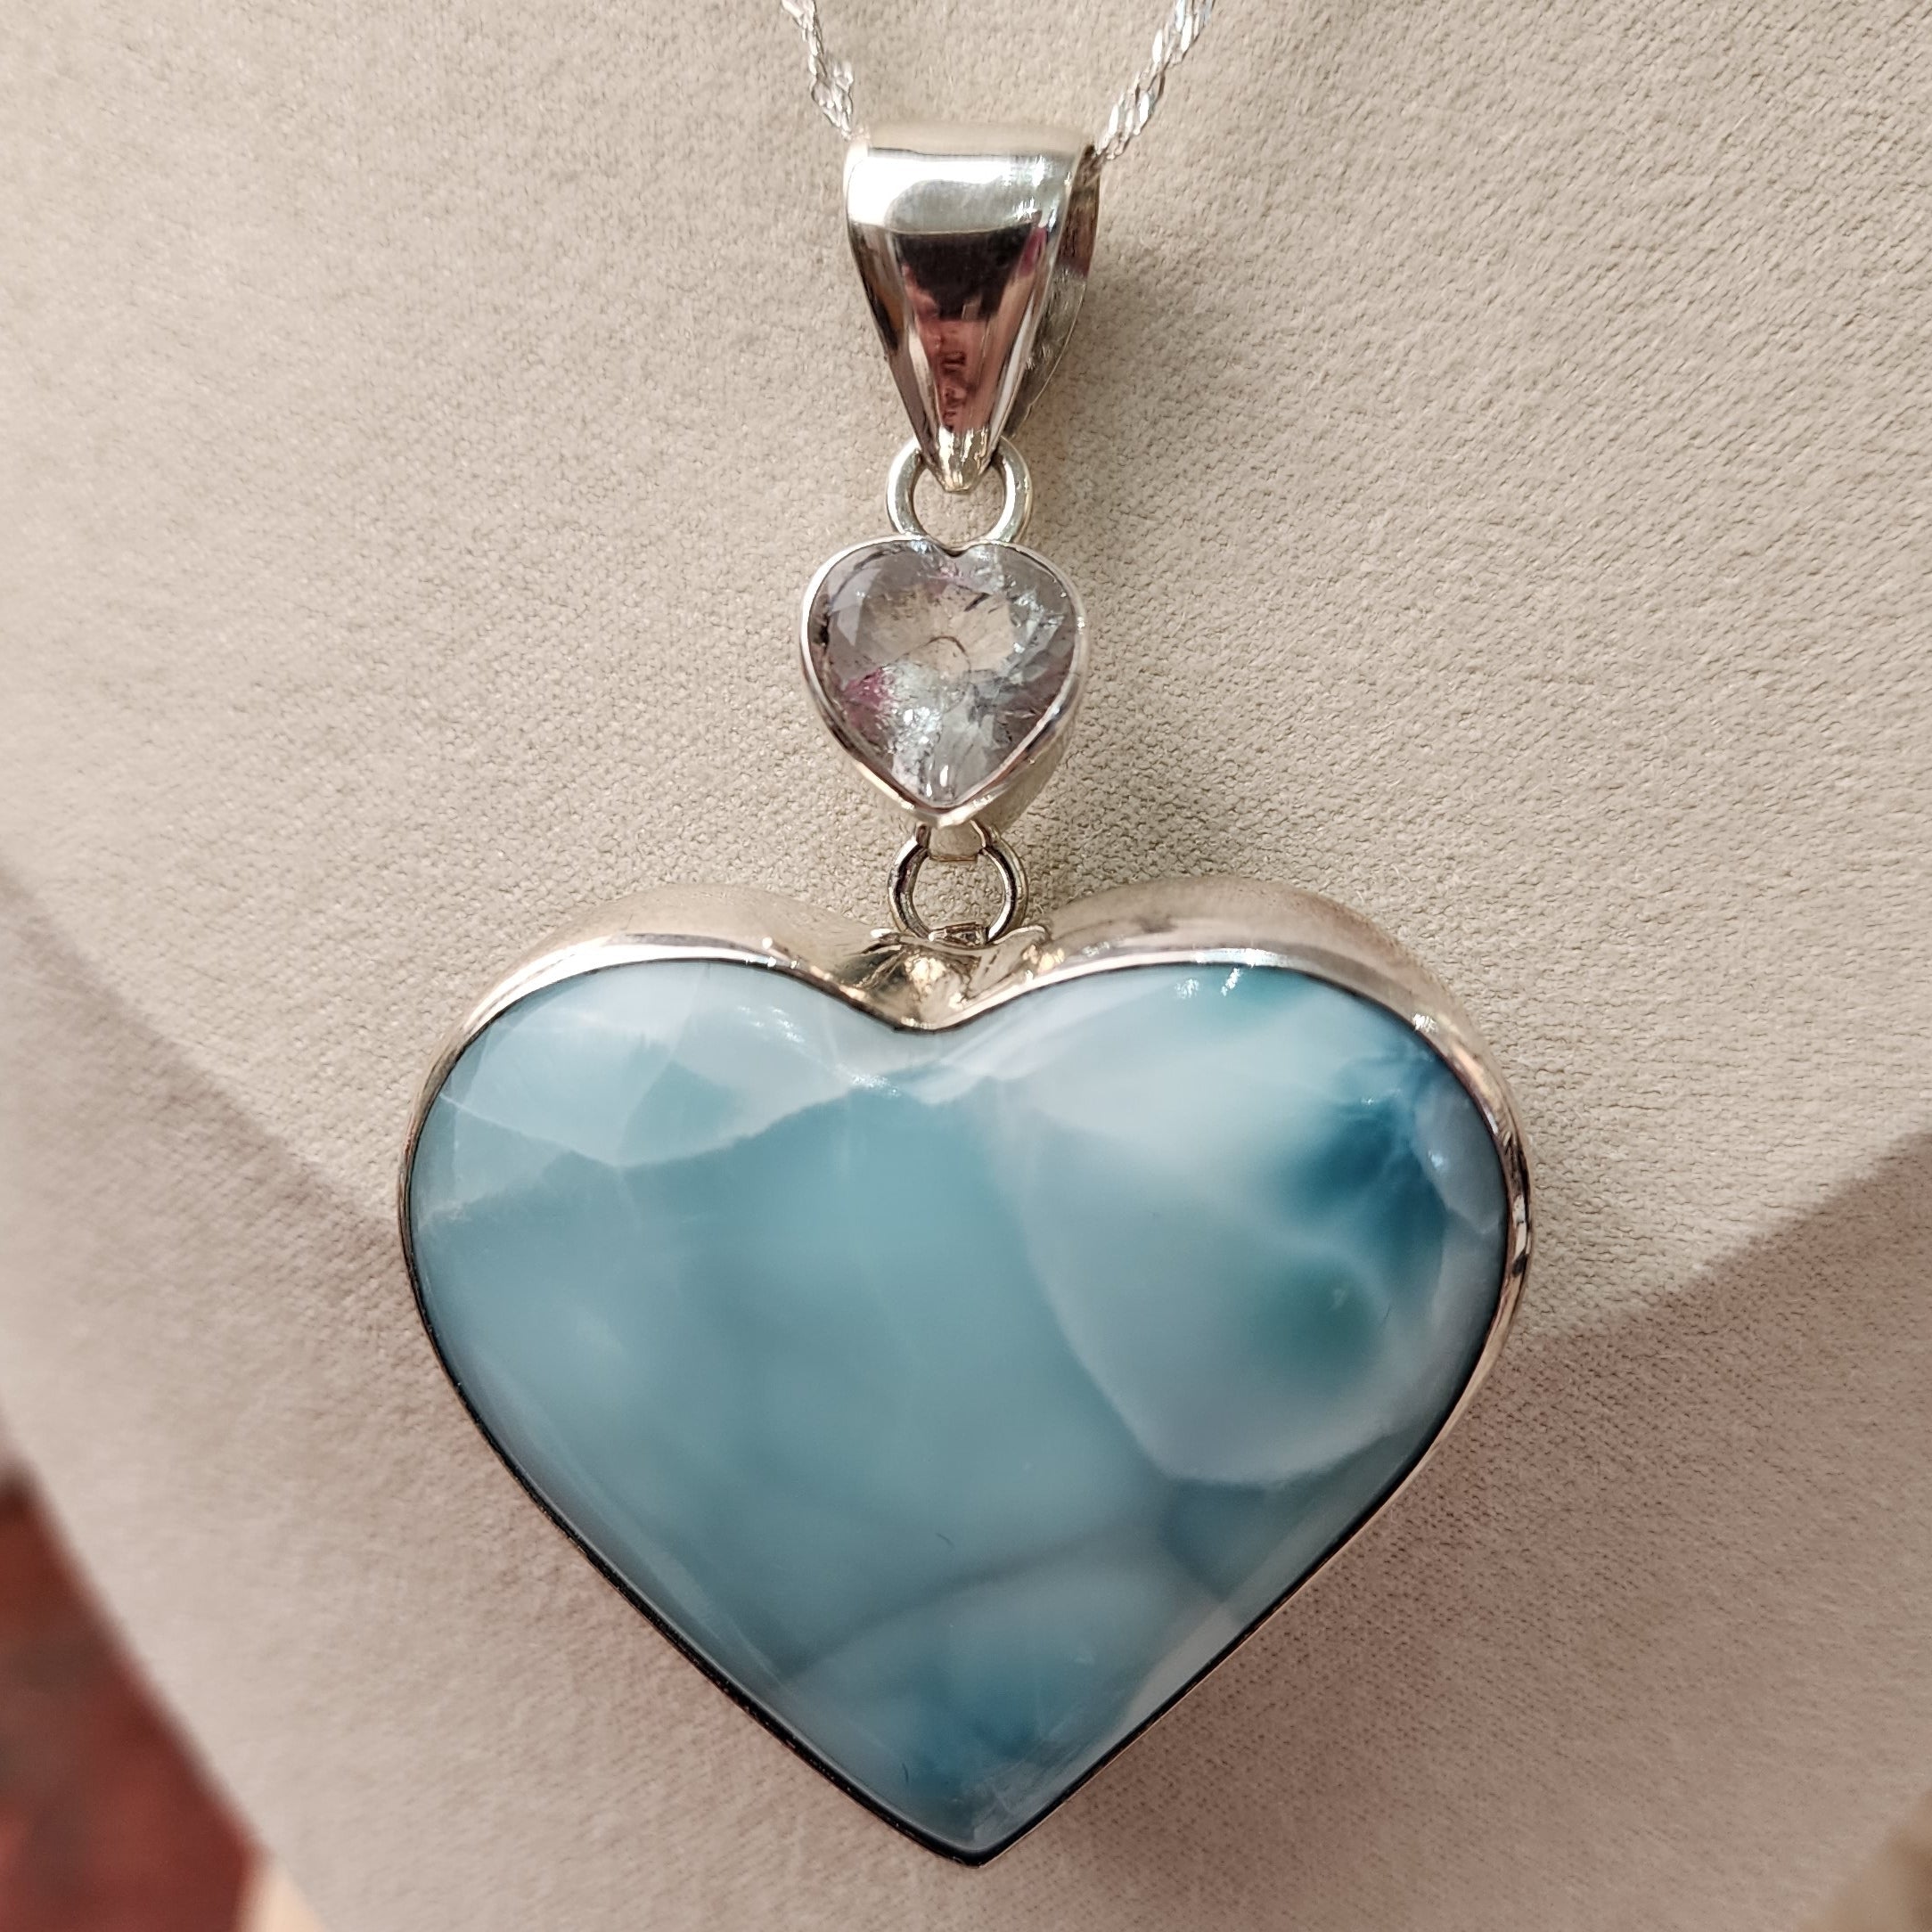 Larimar and Herkimer Diamond Heart Statement Necklace .925 Silver for Amplification, Peace and Tranquility